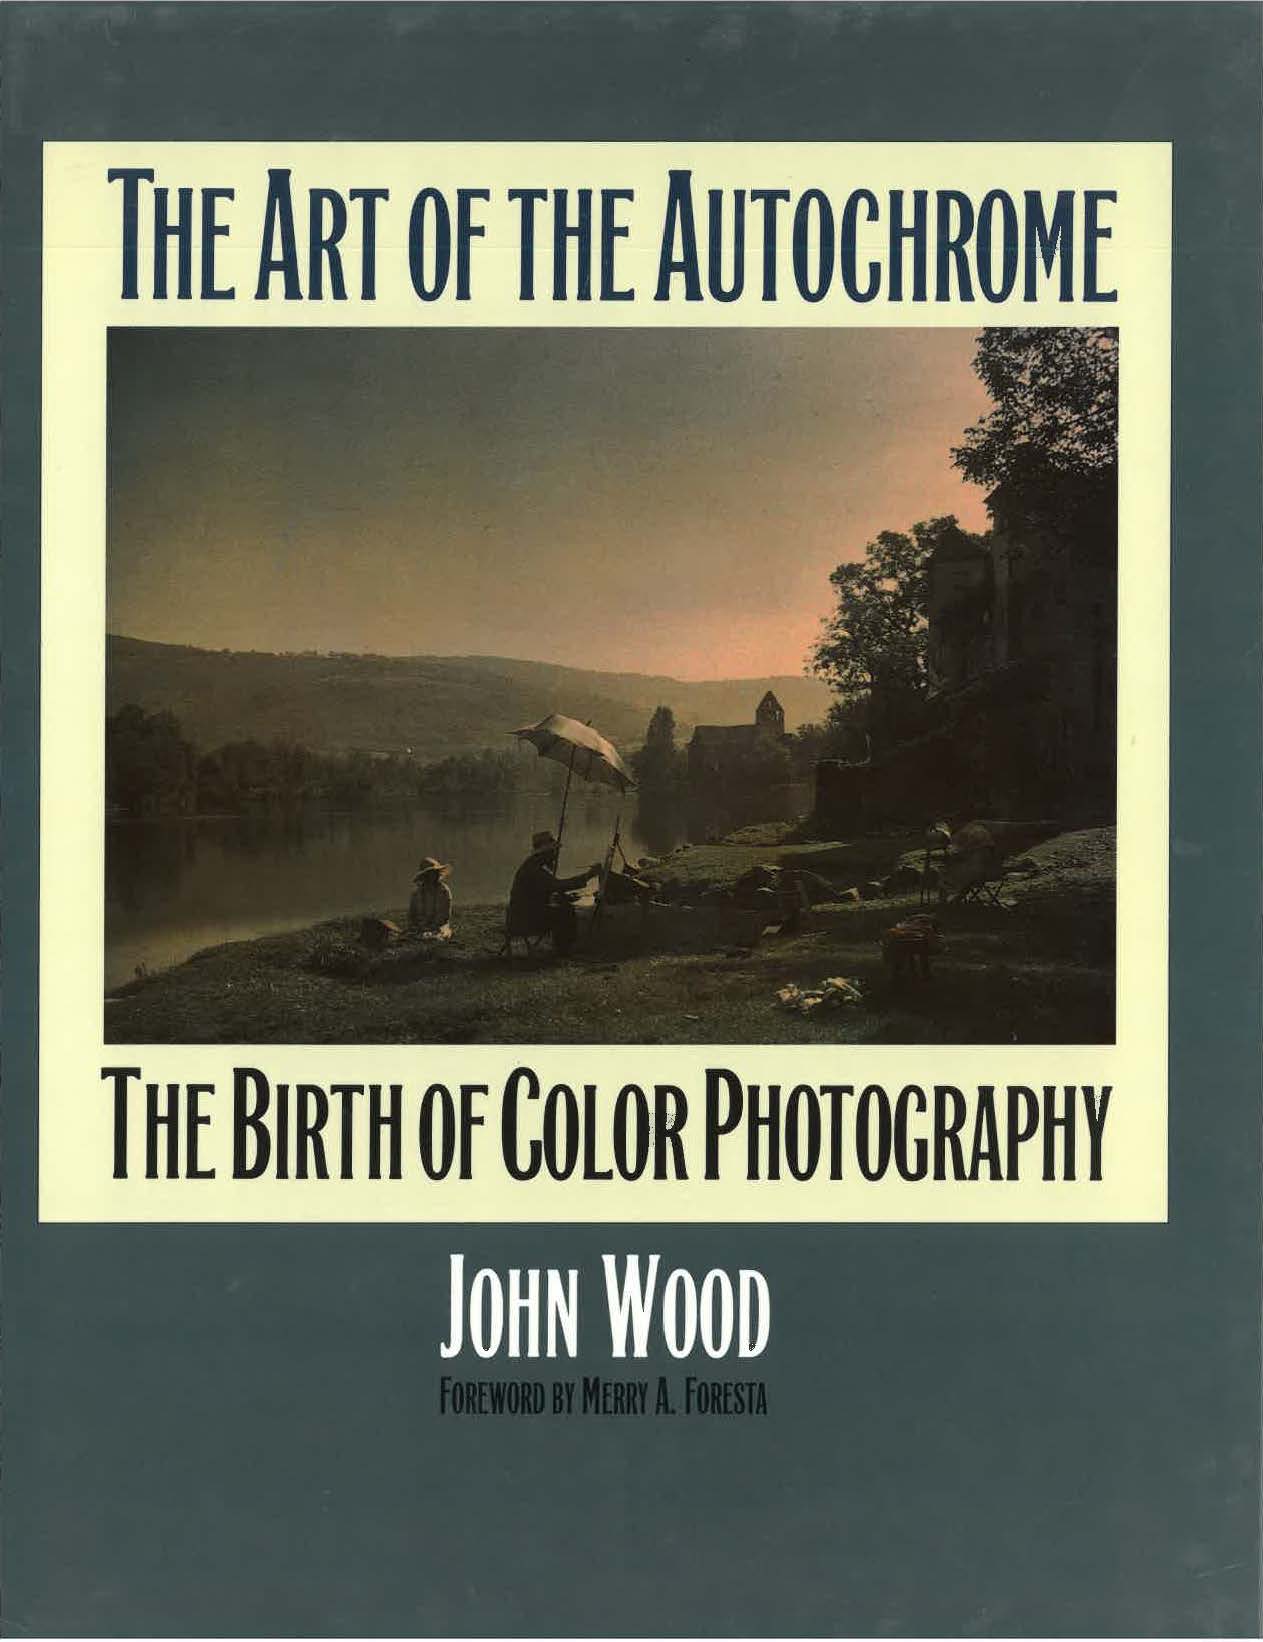 The Art of the Autochrome book cover